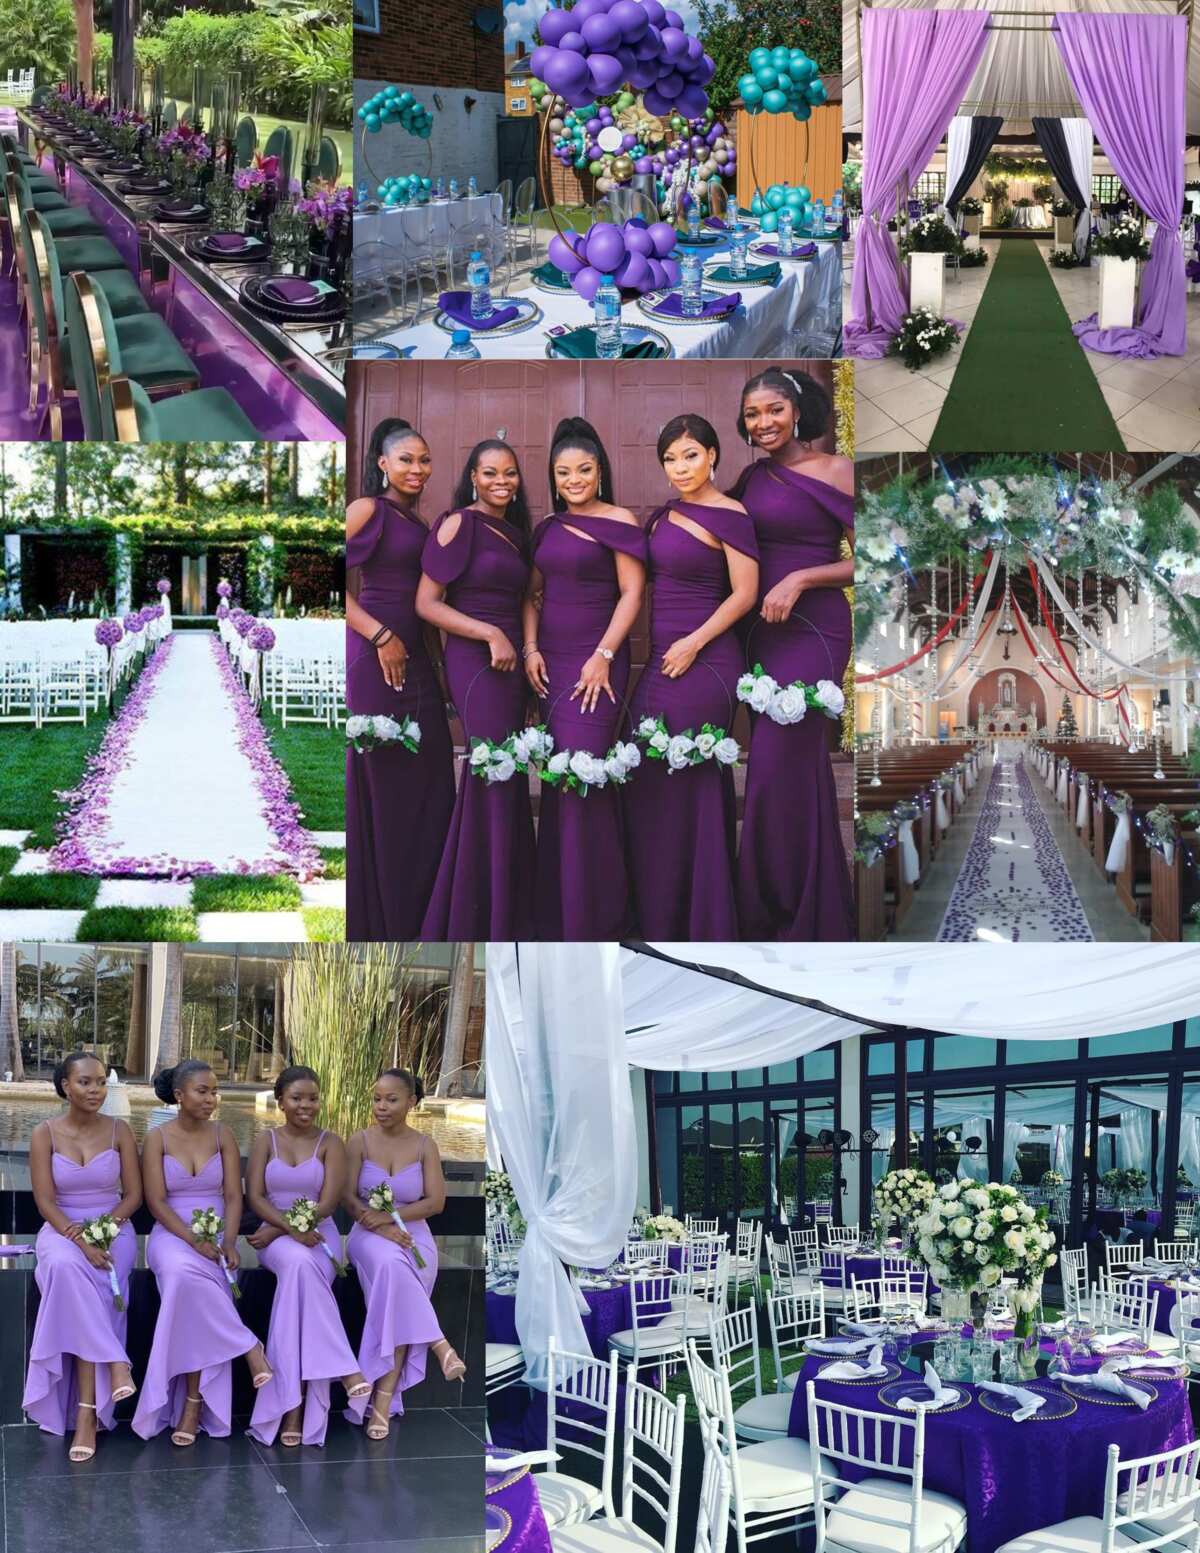 How To Accessorise A Purple Dress - Style Guides - Shiels – Shiels Jewellers